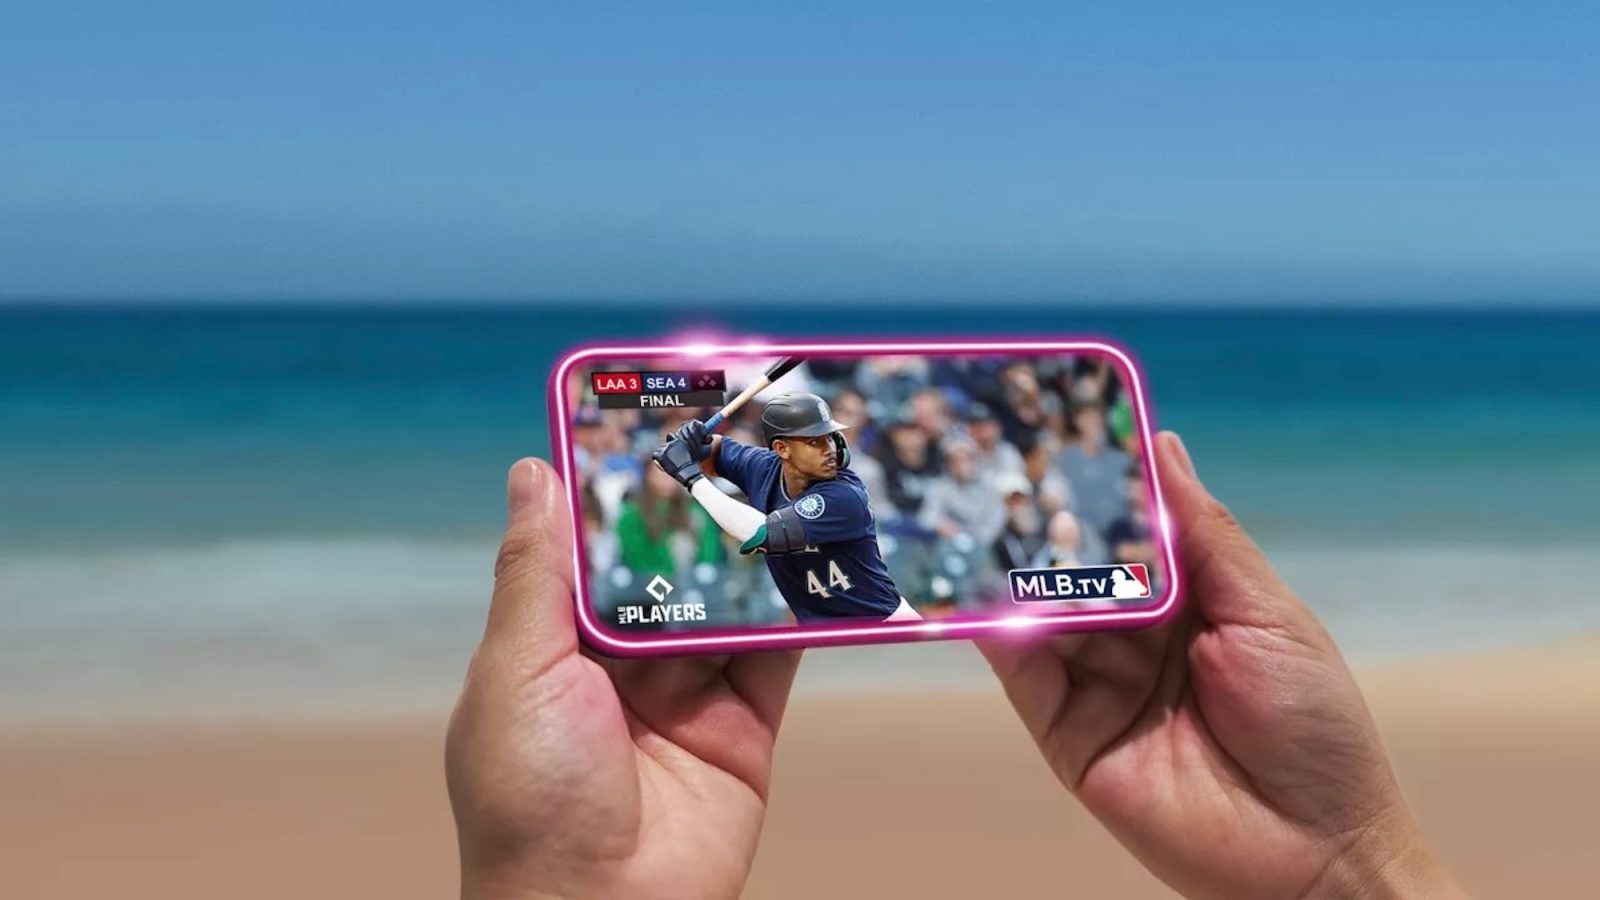 T-Mobile confirms its free MLB․TV offer will return this year; MLB app updated for 2023 season